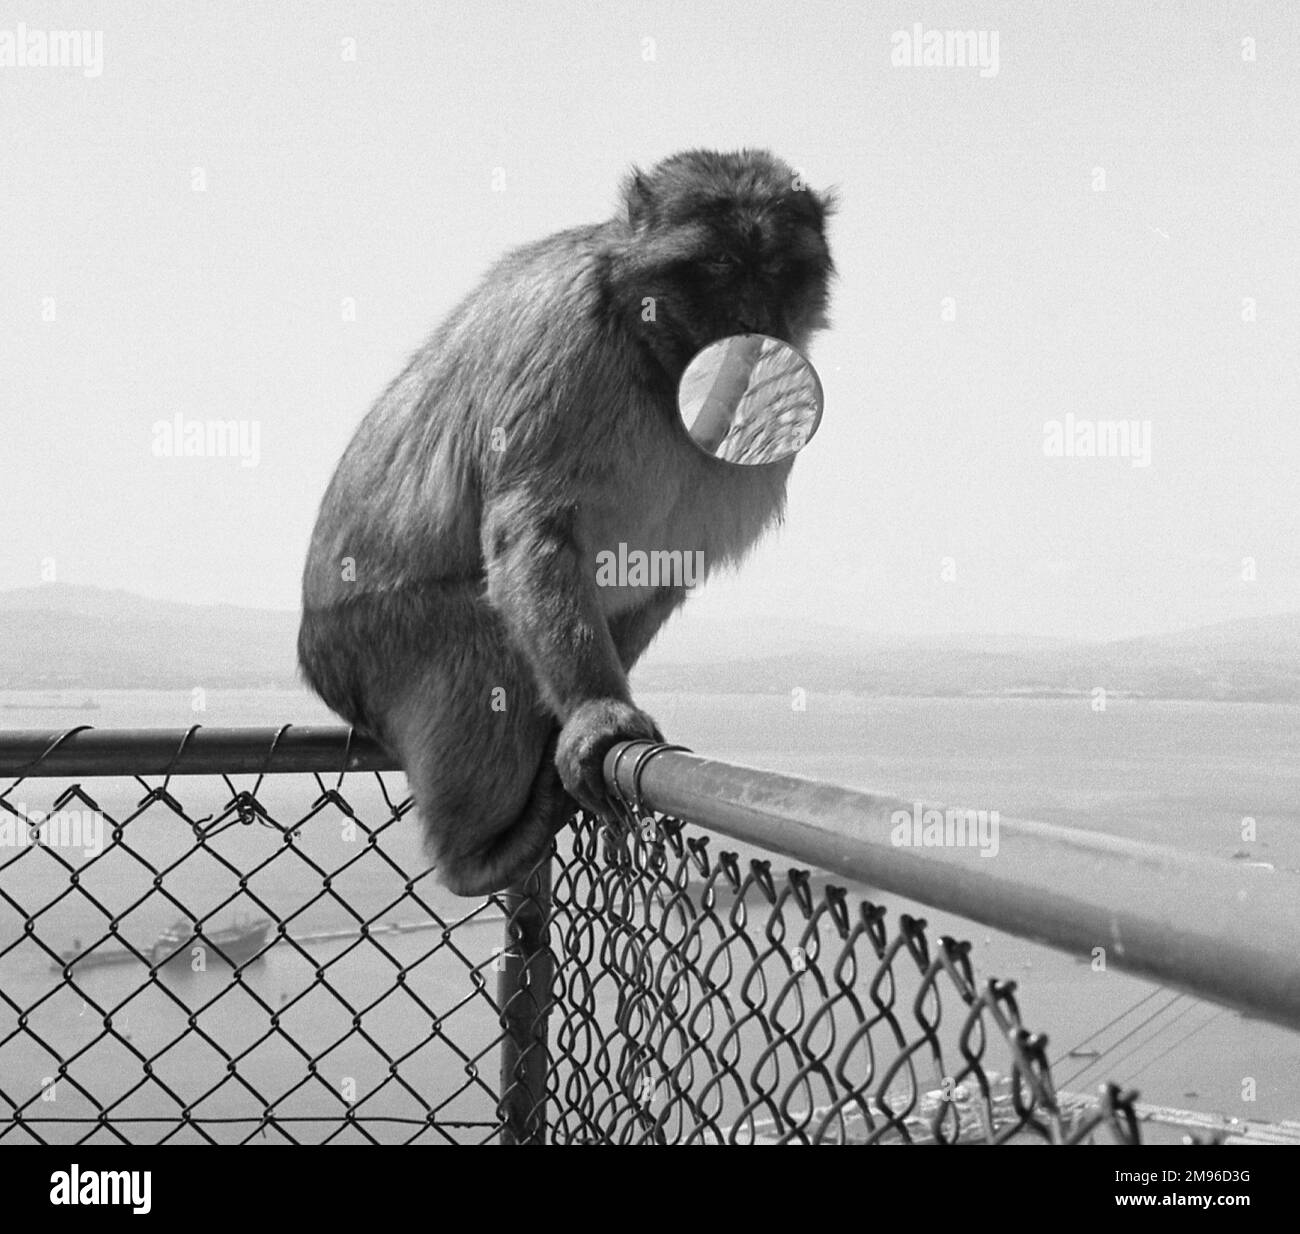 A monkey sitting on a fence, probably on the island of Gibraltar.  It is holding a circular mirror in its mouth. Stock Photo